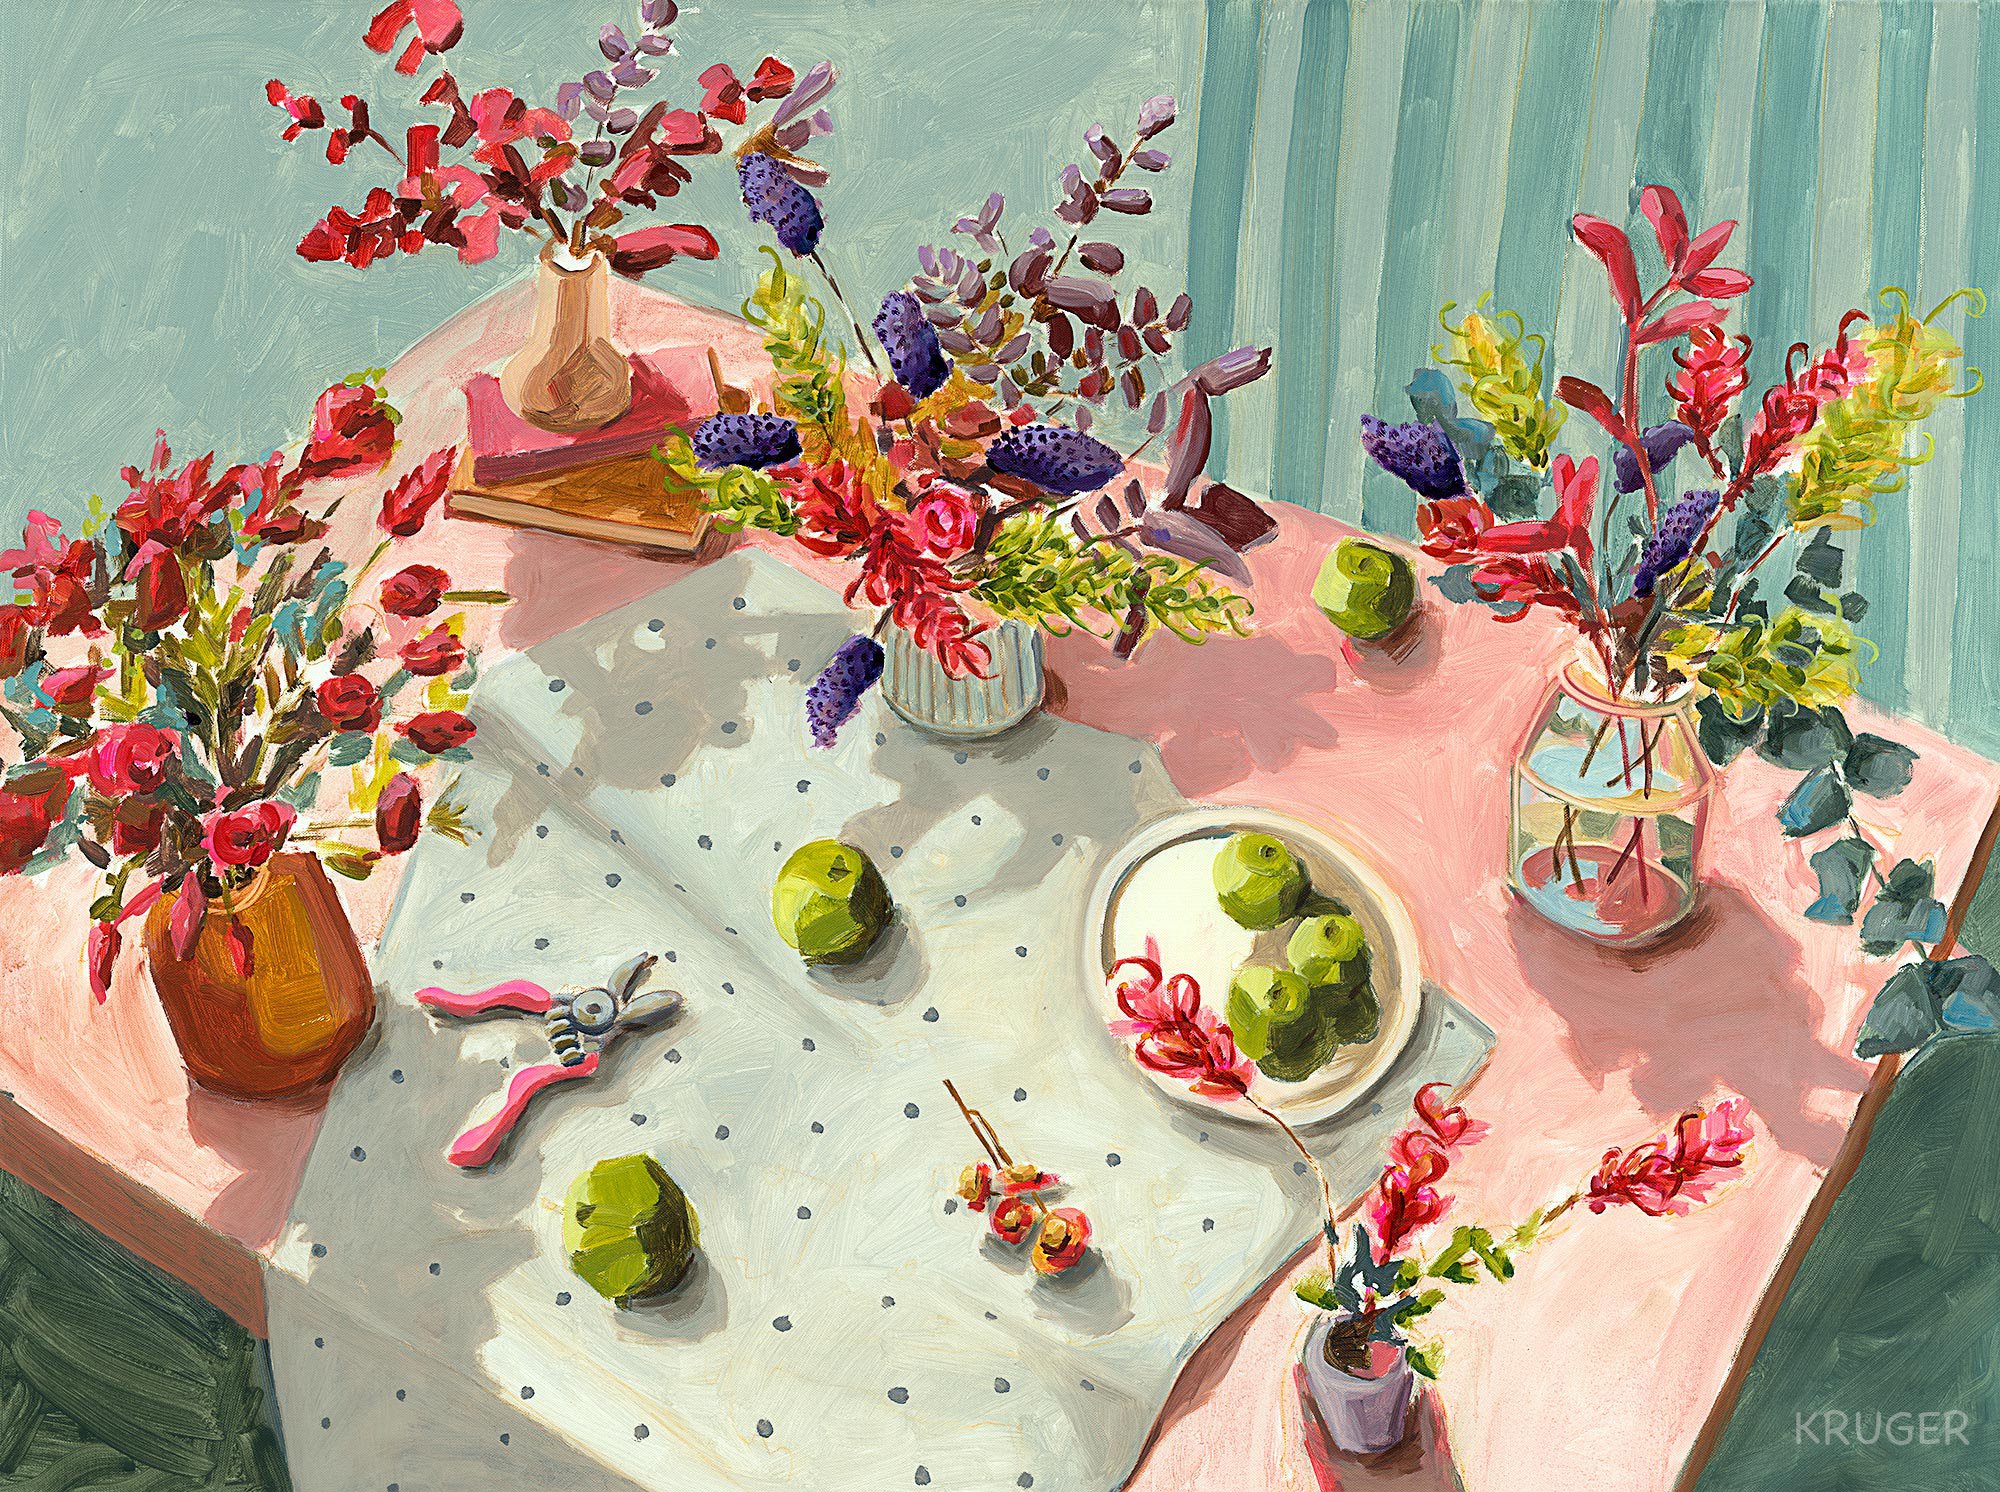 “Midsummer table”, displayed as part of solo exhibition at Tweed Regional Gallery, 2022, acrylic on canvas, 94cm x 124.5cm, marked NFS for this show